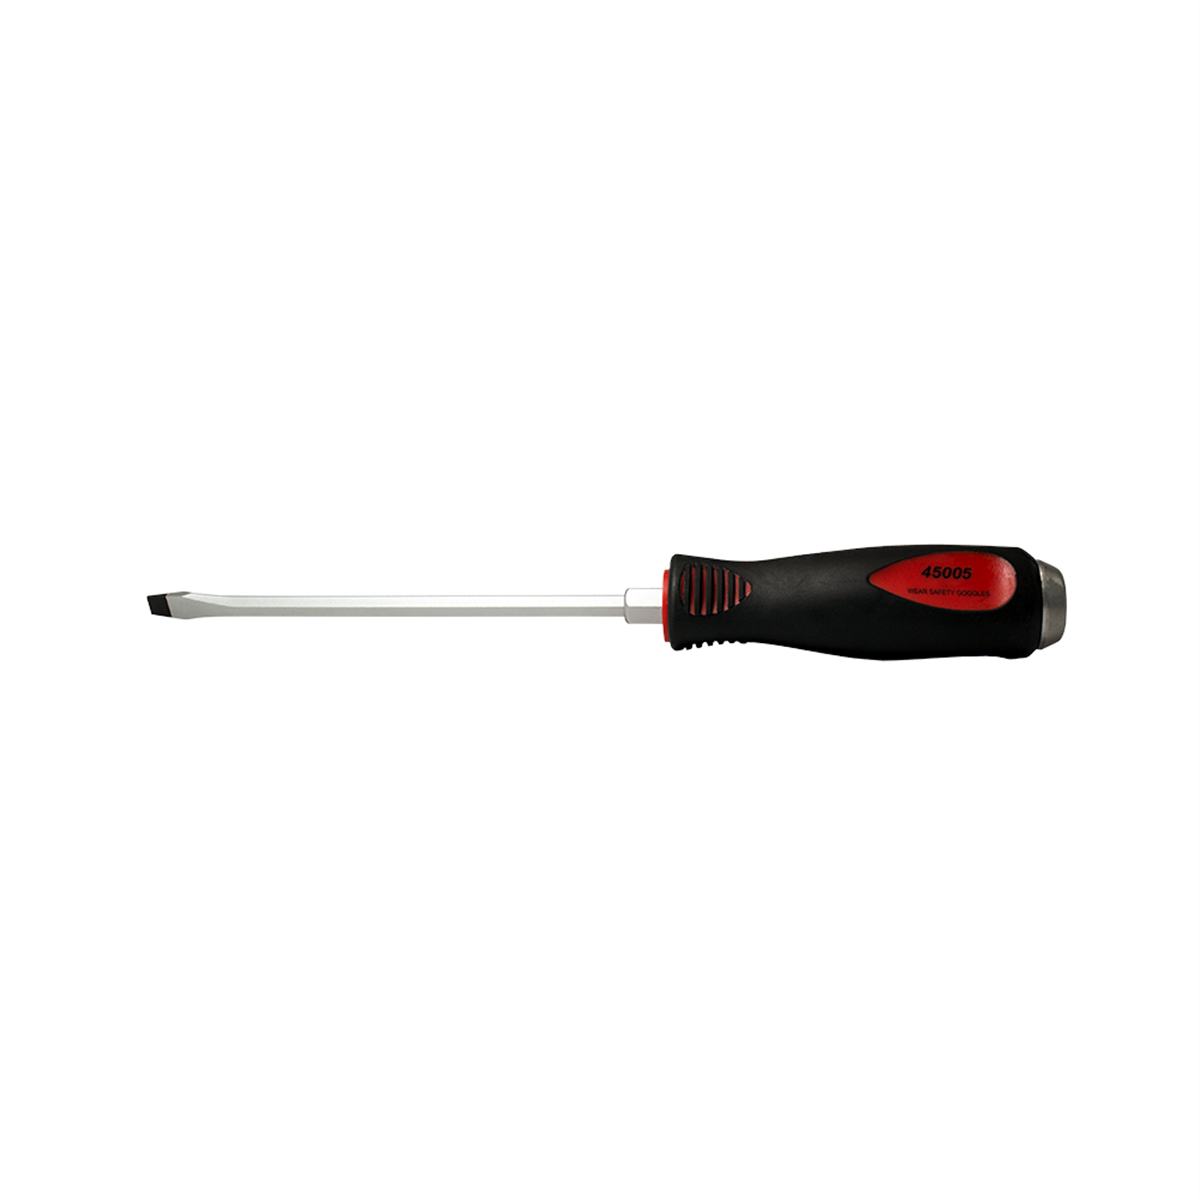 5/16 X 7" SLOTTED SCREWDRIVER